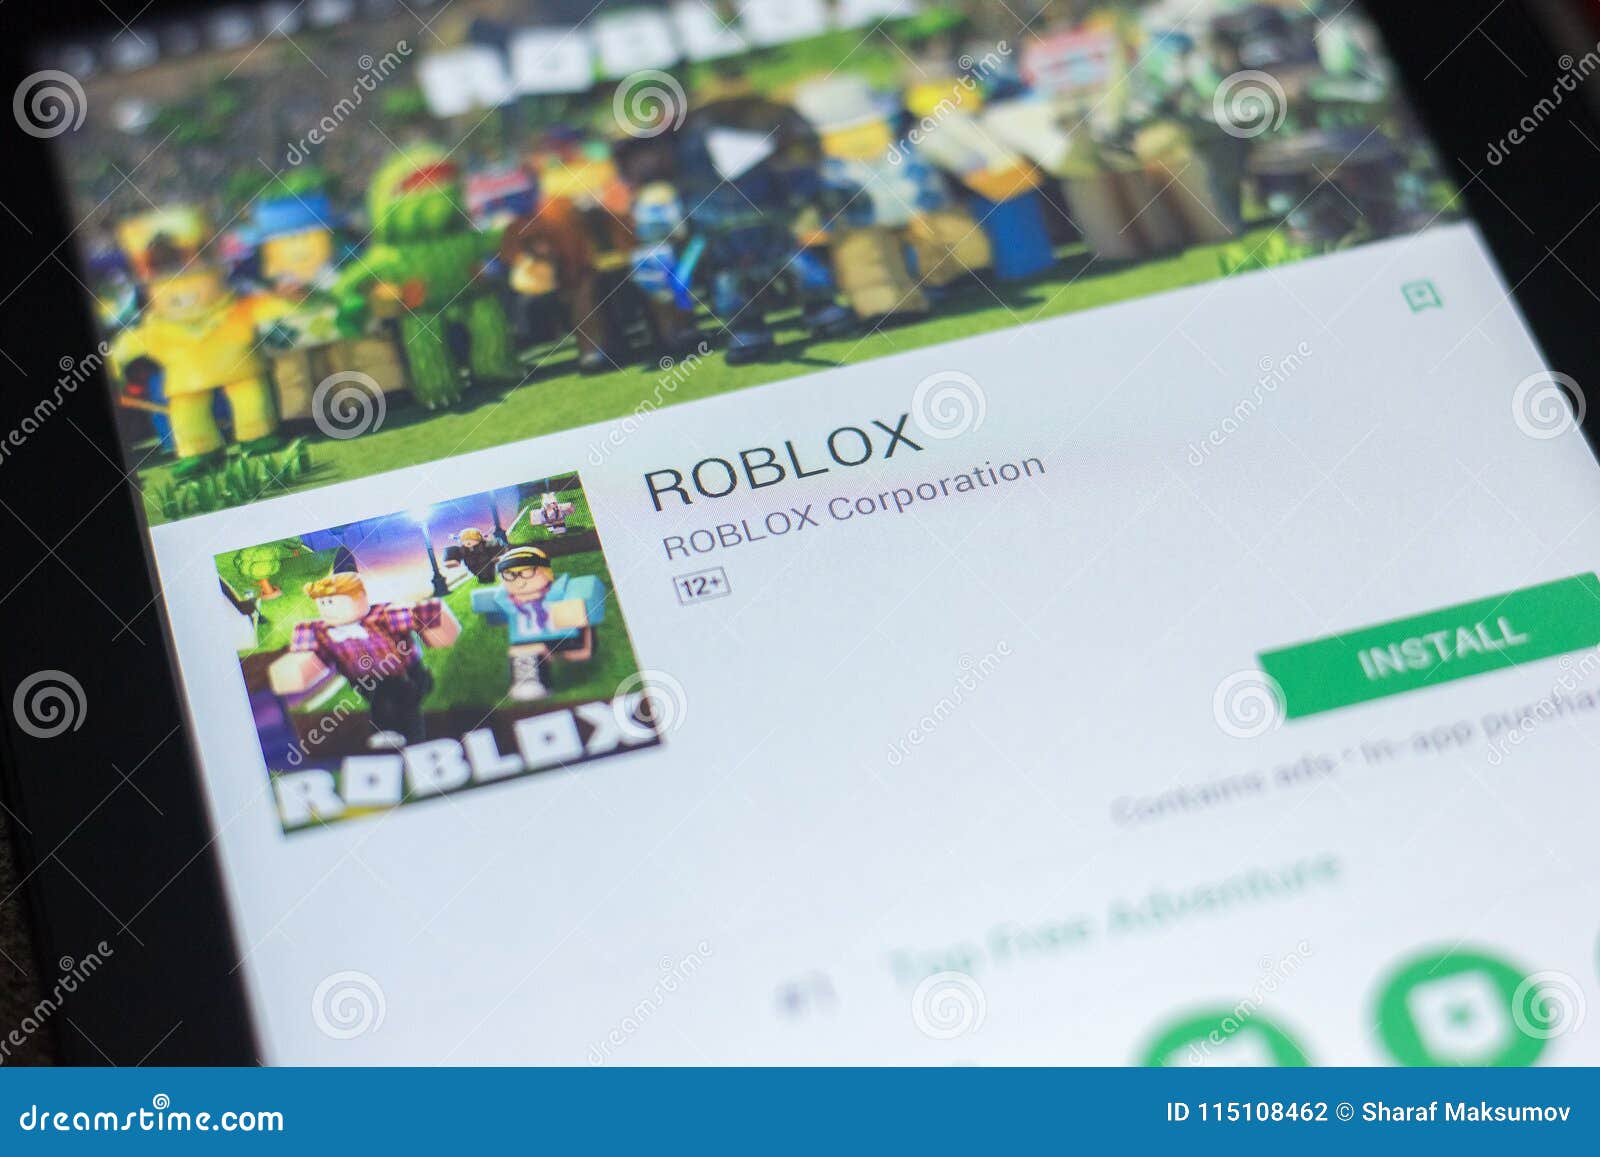 54 Roblox Photos Free Royalty Free Stock Photos From Dreamstime - how to get image id in roblox on pc